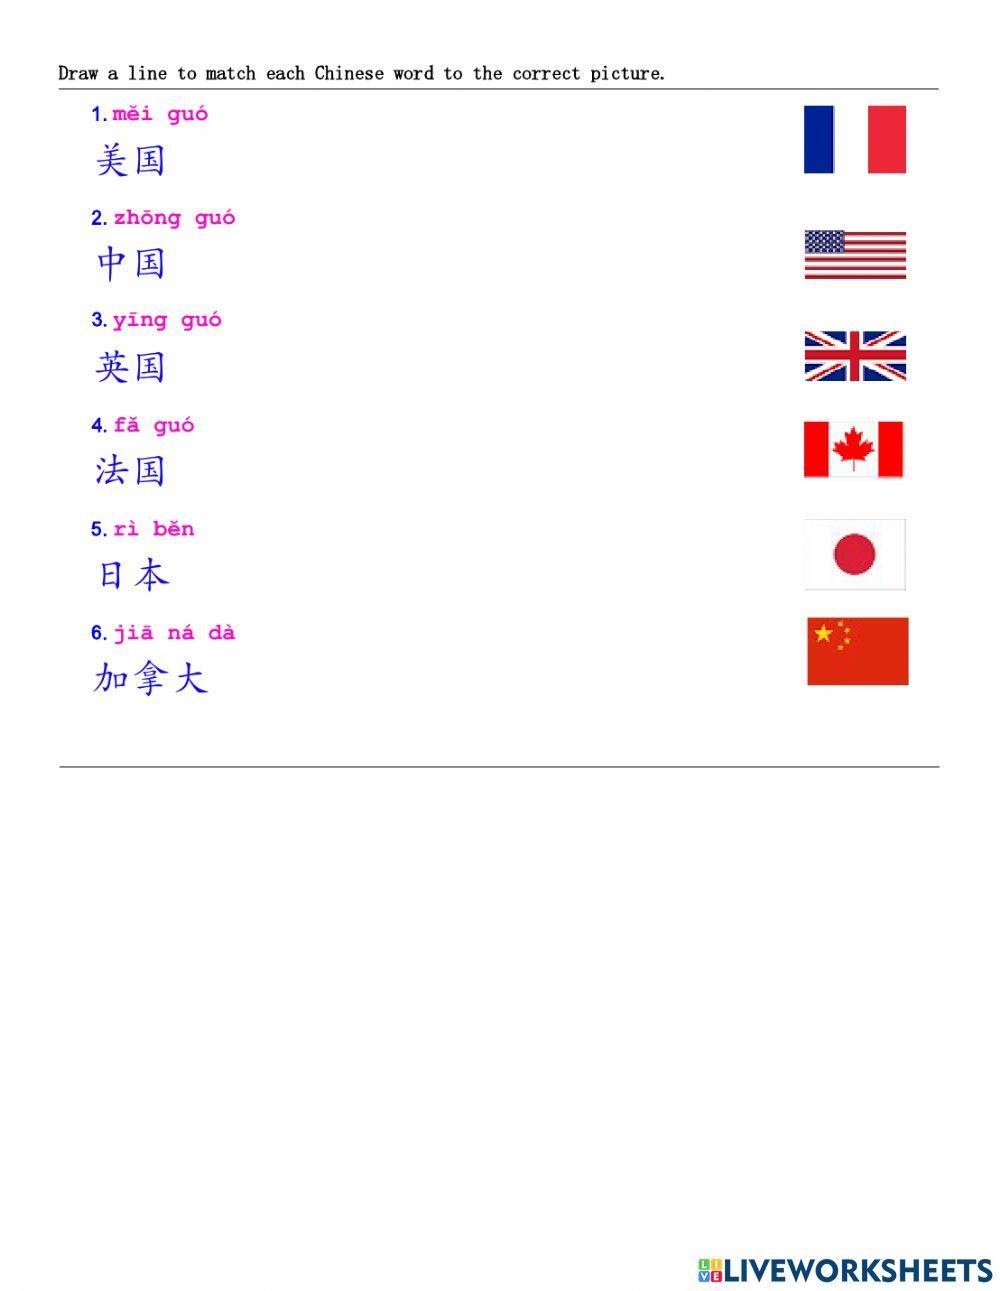 Countries in Chinese